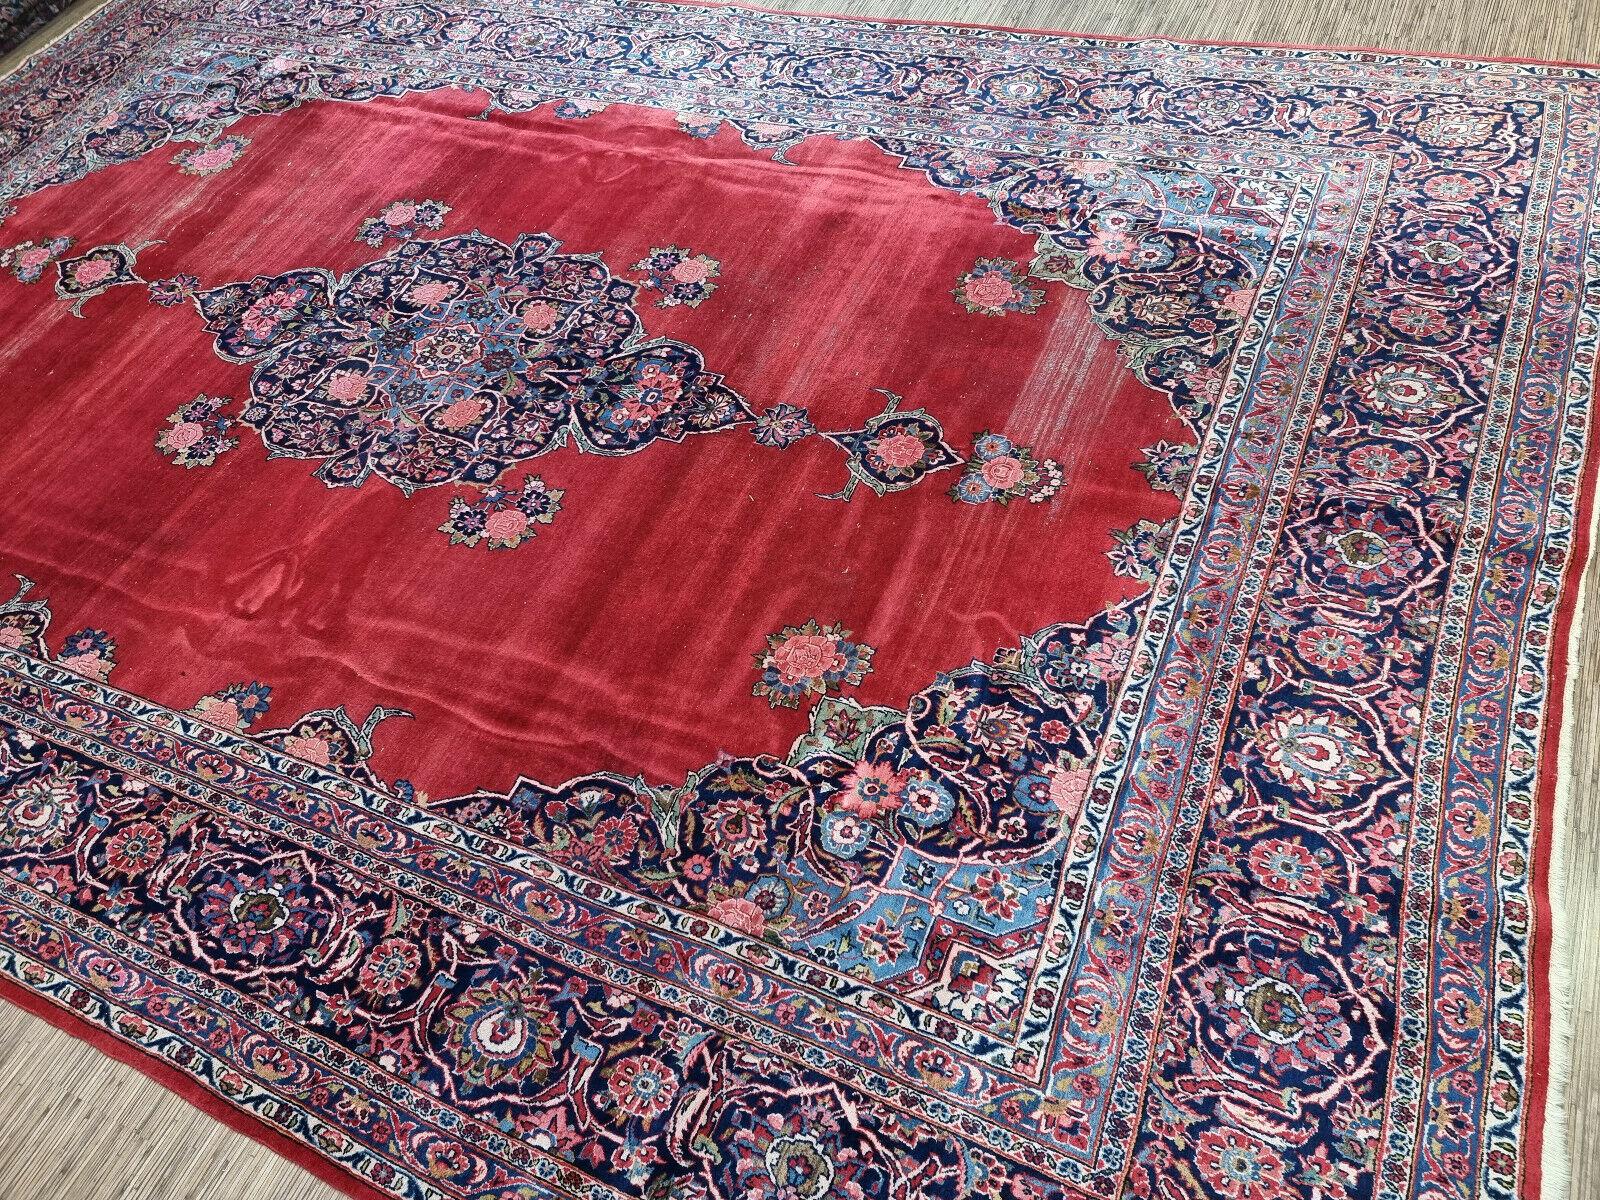 Hand-Knotted Handmade Antique Persian Style Kashan Distressed Rug 8.5' x 12.9', 1920s - 1D68 For Sale